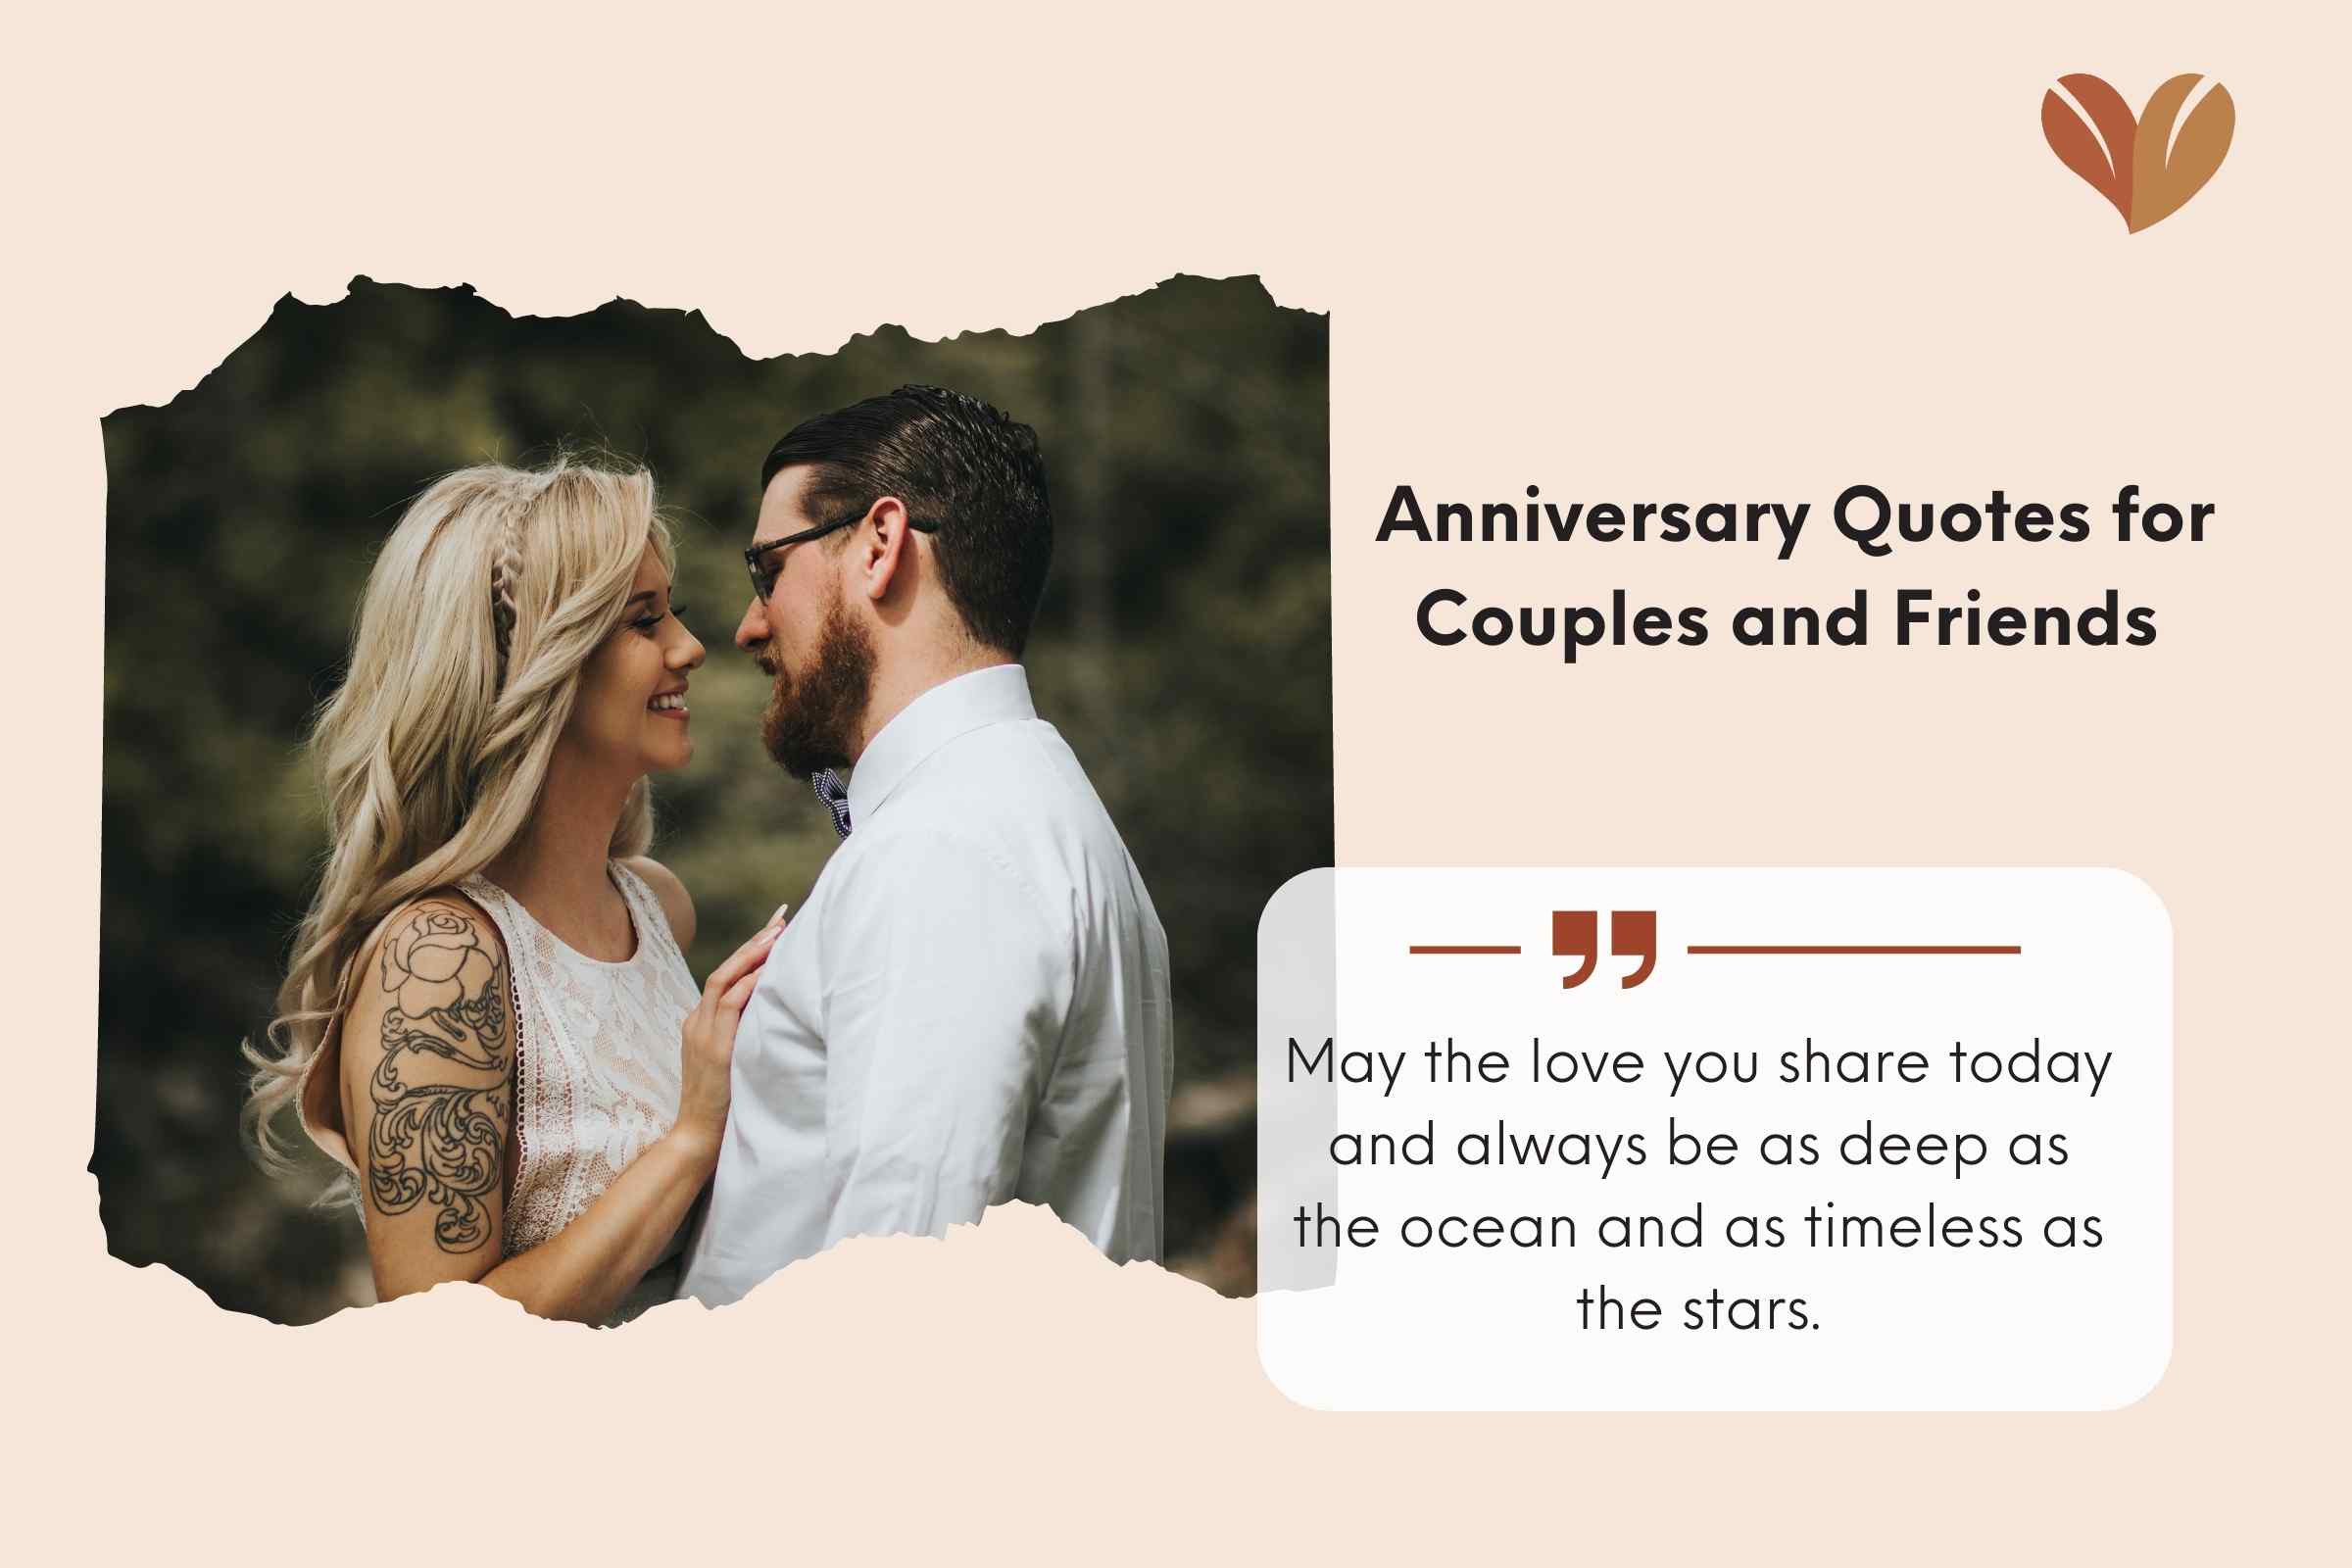 Simple Anniversary Quotes for Couples and Friends